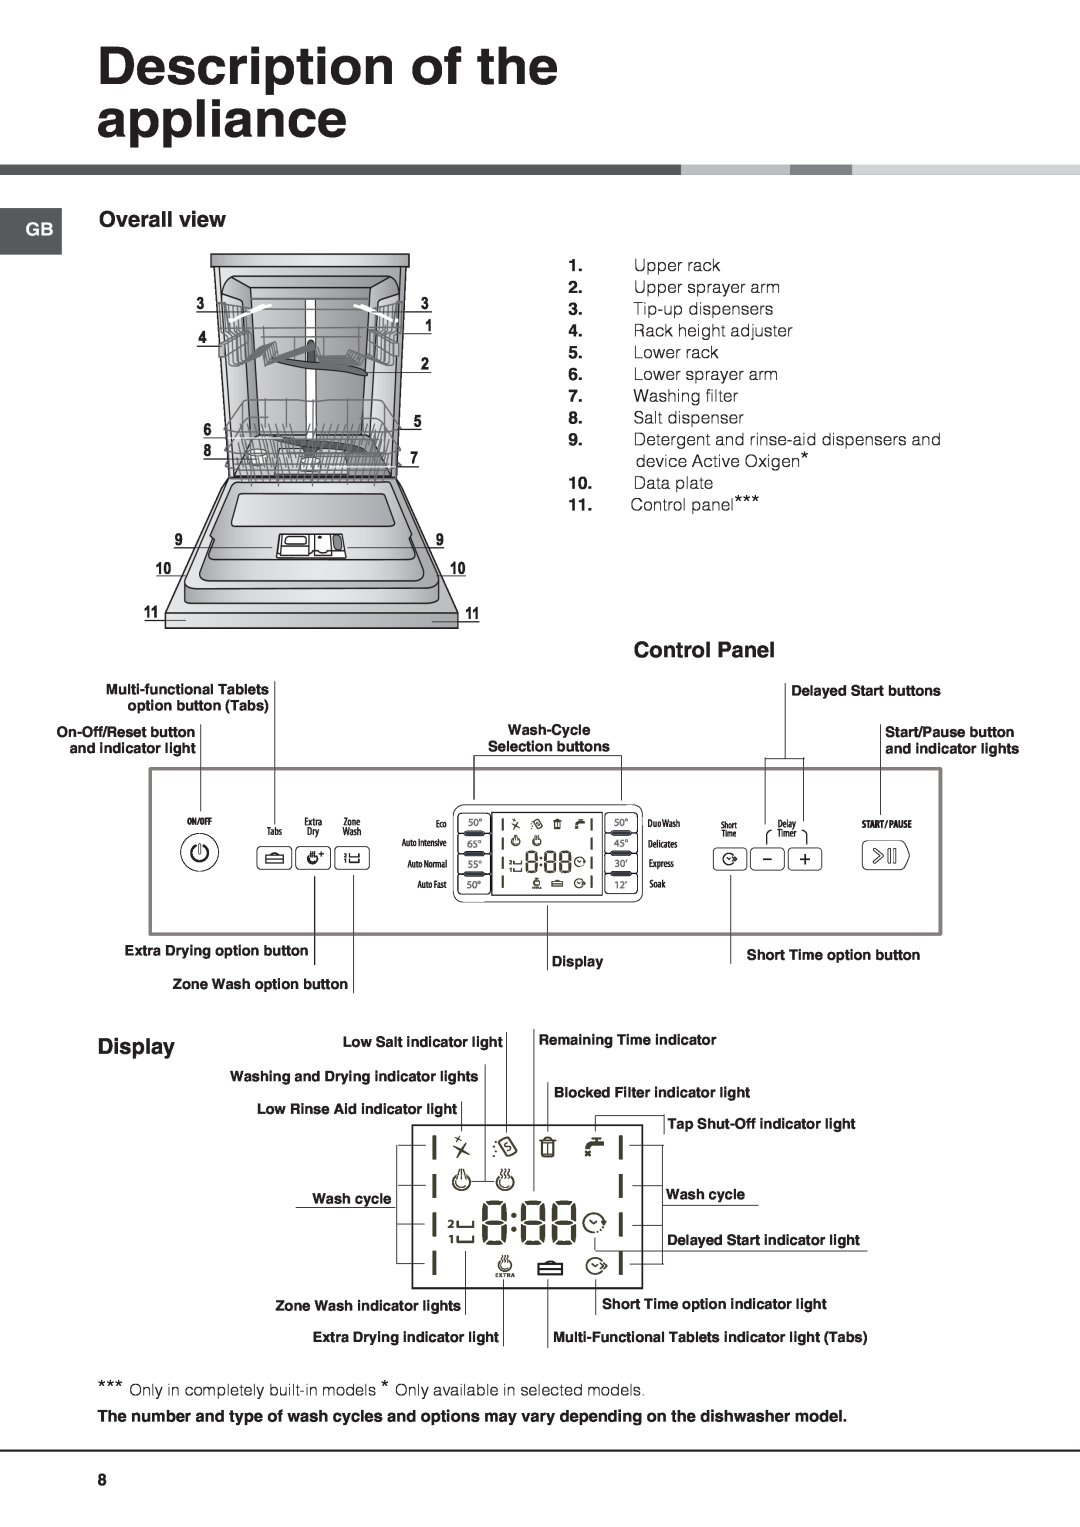 Hotpoint FDEF 33121 manual Description of the appliance, Overall view, Multi-functional Tablets option button Tabs 